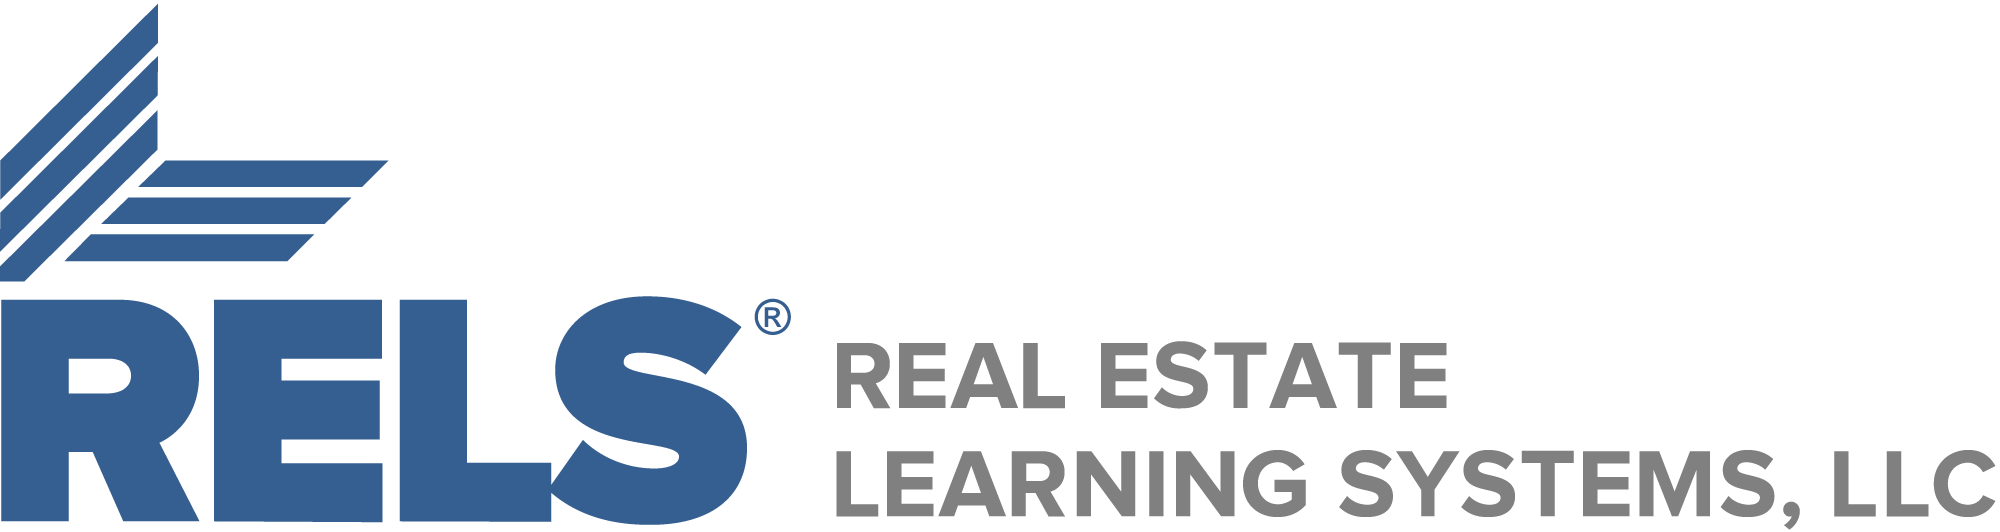 Real Estate Learning Systems, LLC